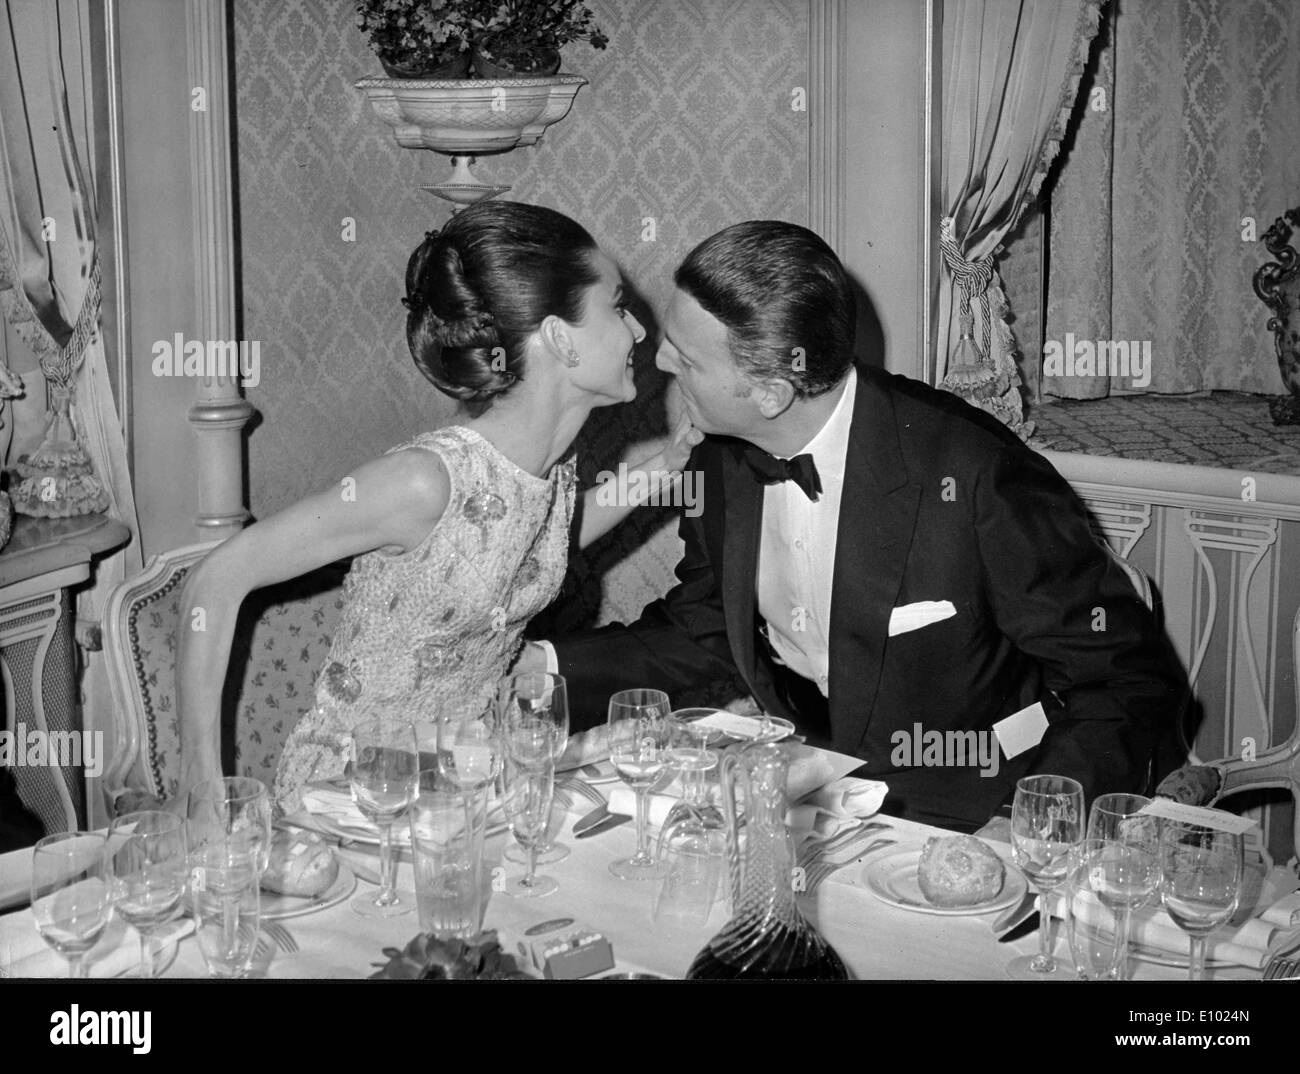 Actress Audrey Hepburn chats with Givenchy Stock Photo